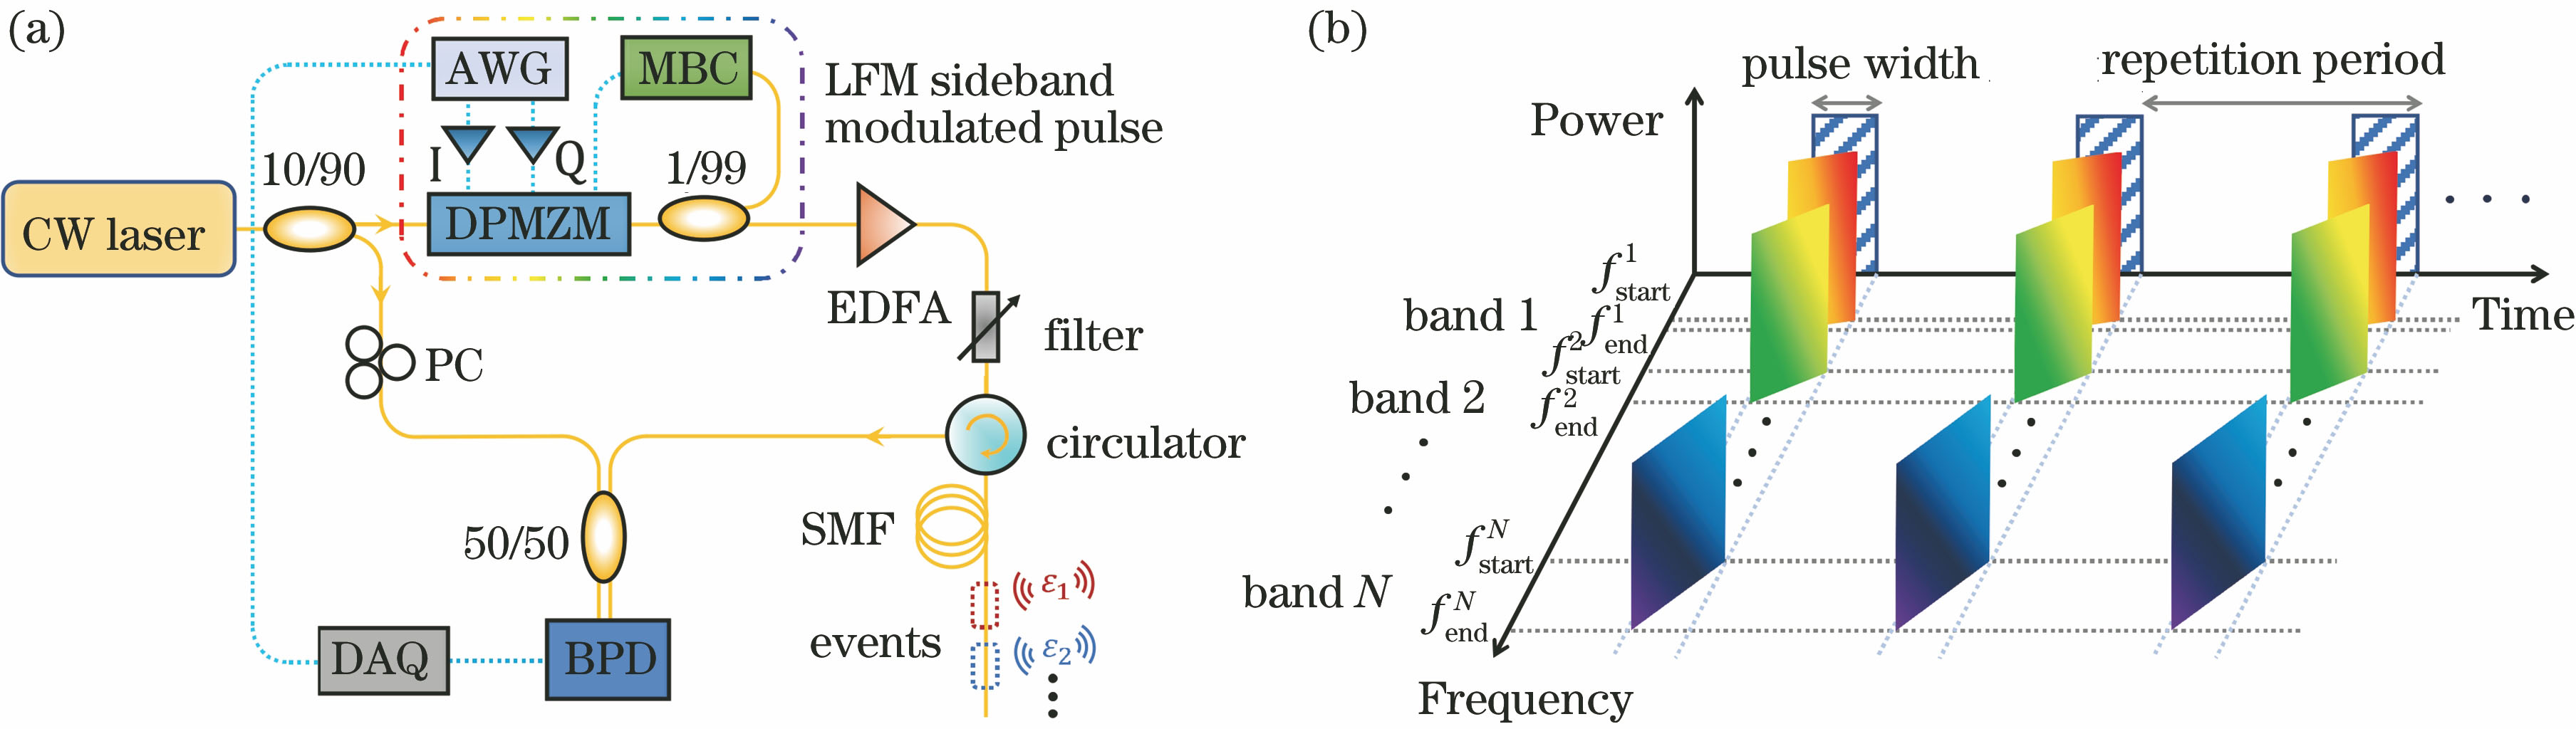 Schematic diagrams of experimental system. (a) Dynamic range extended distributed optical-fiber sensing experimental device; (b) Schematic diagram of LFM sideband modulation pulse